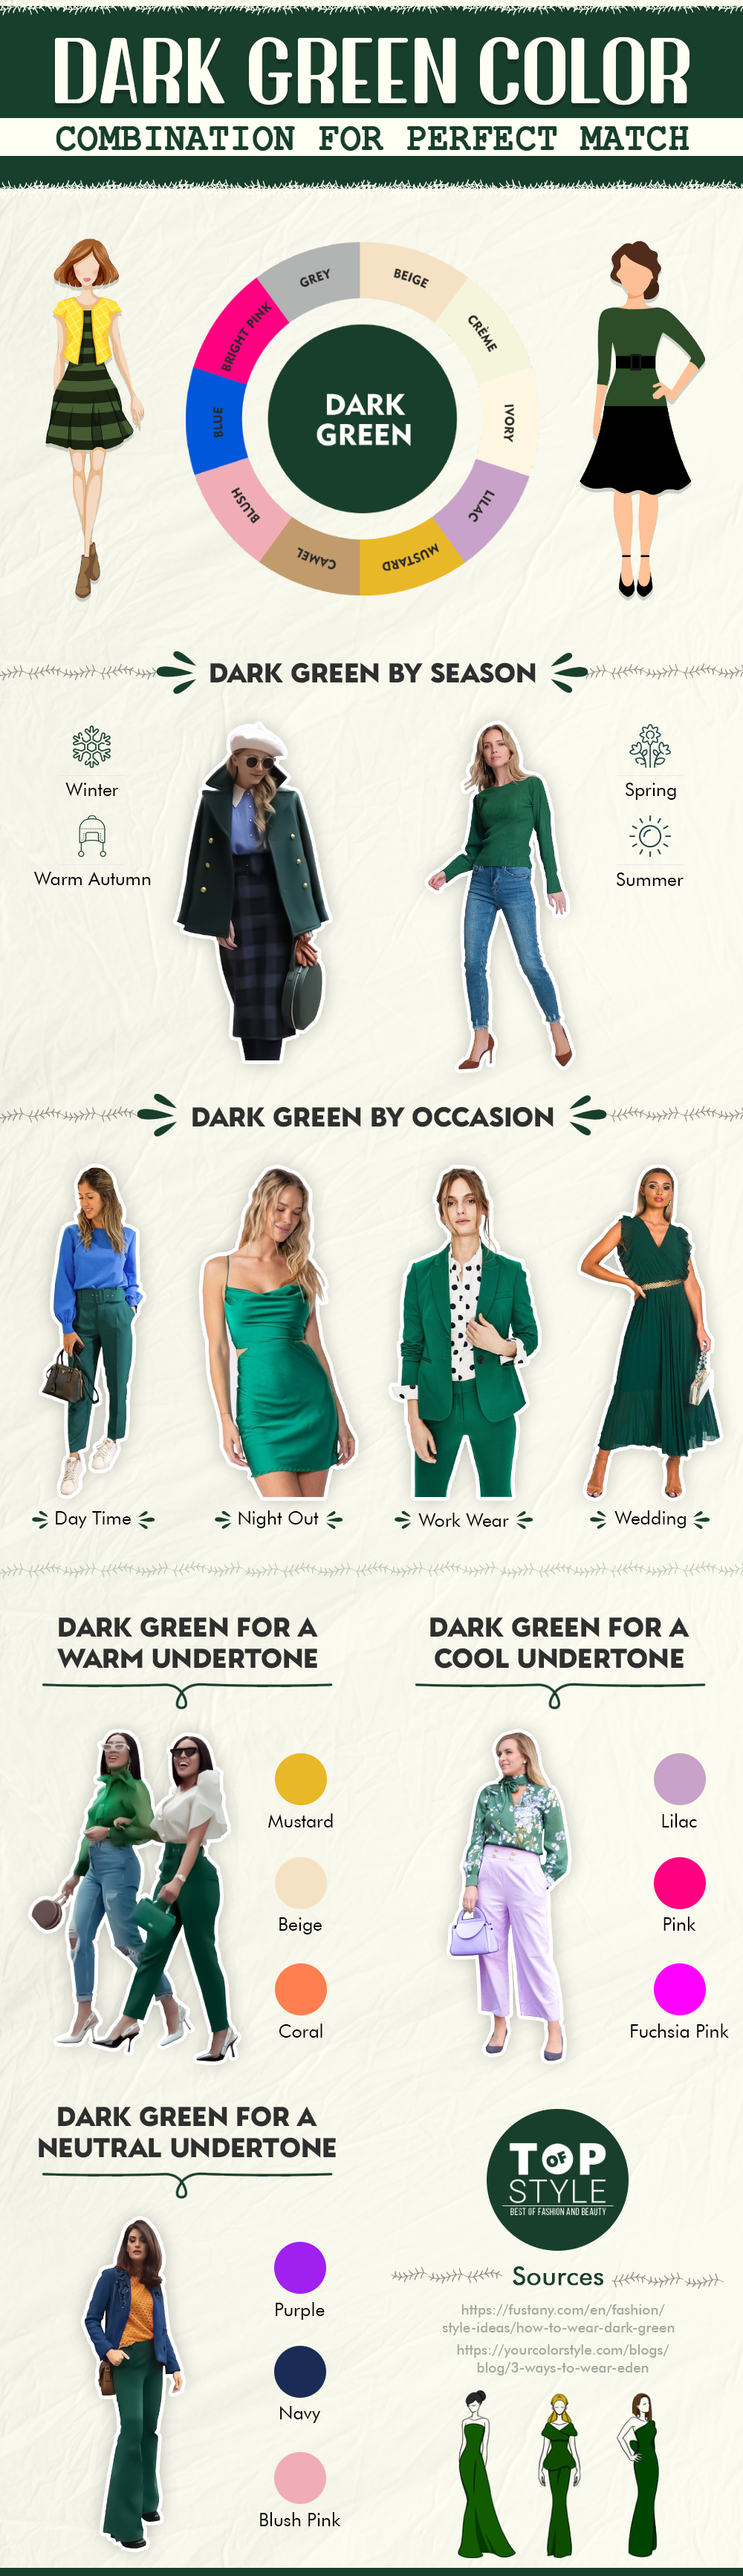 Top 10 Winter Wedding Color Ideas With Emerald Green